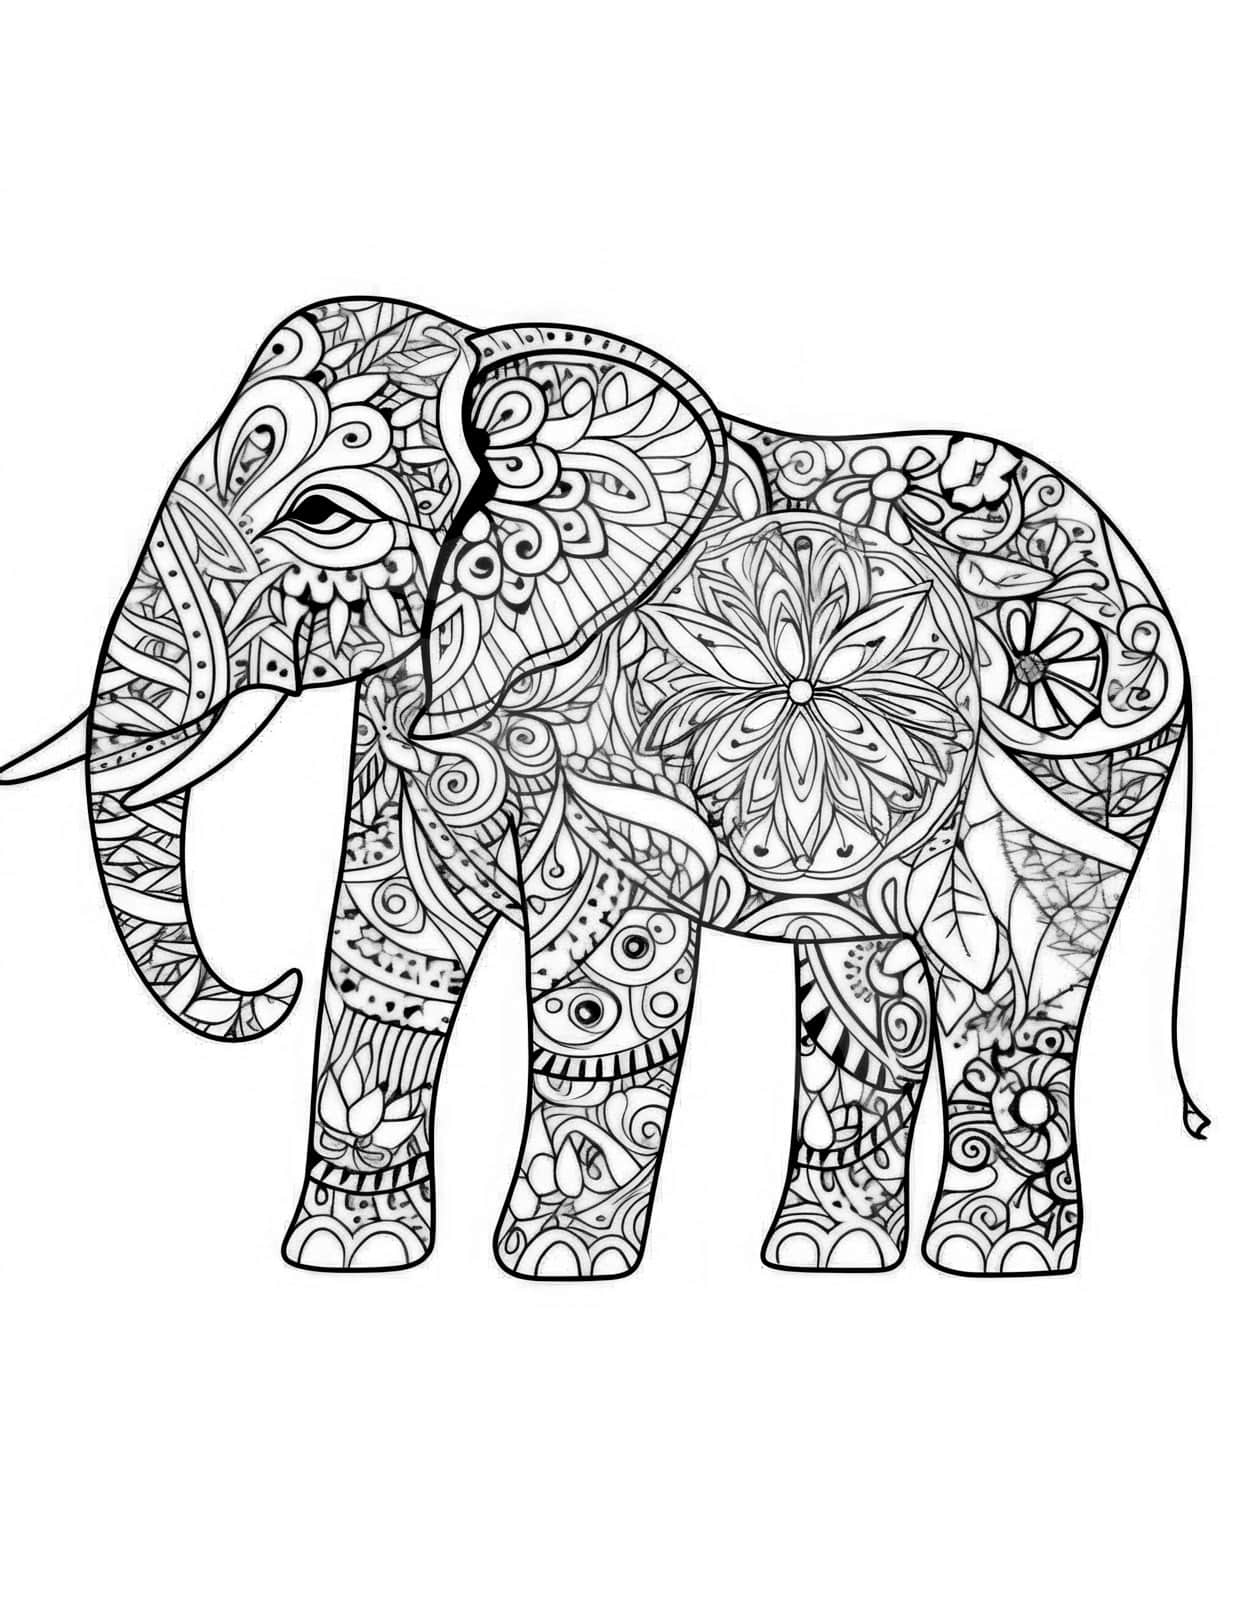 Majestic elephant coloring pages for adults and kids